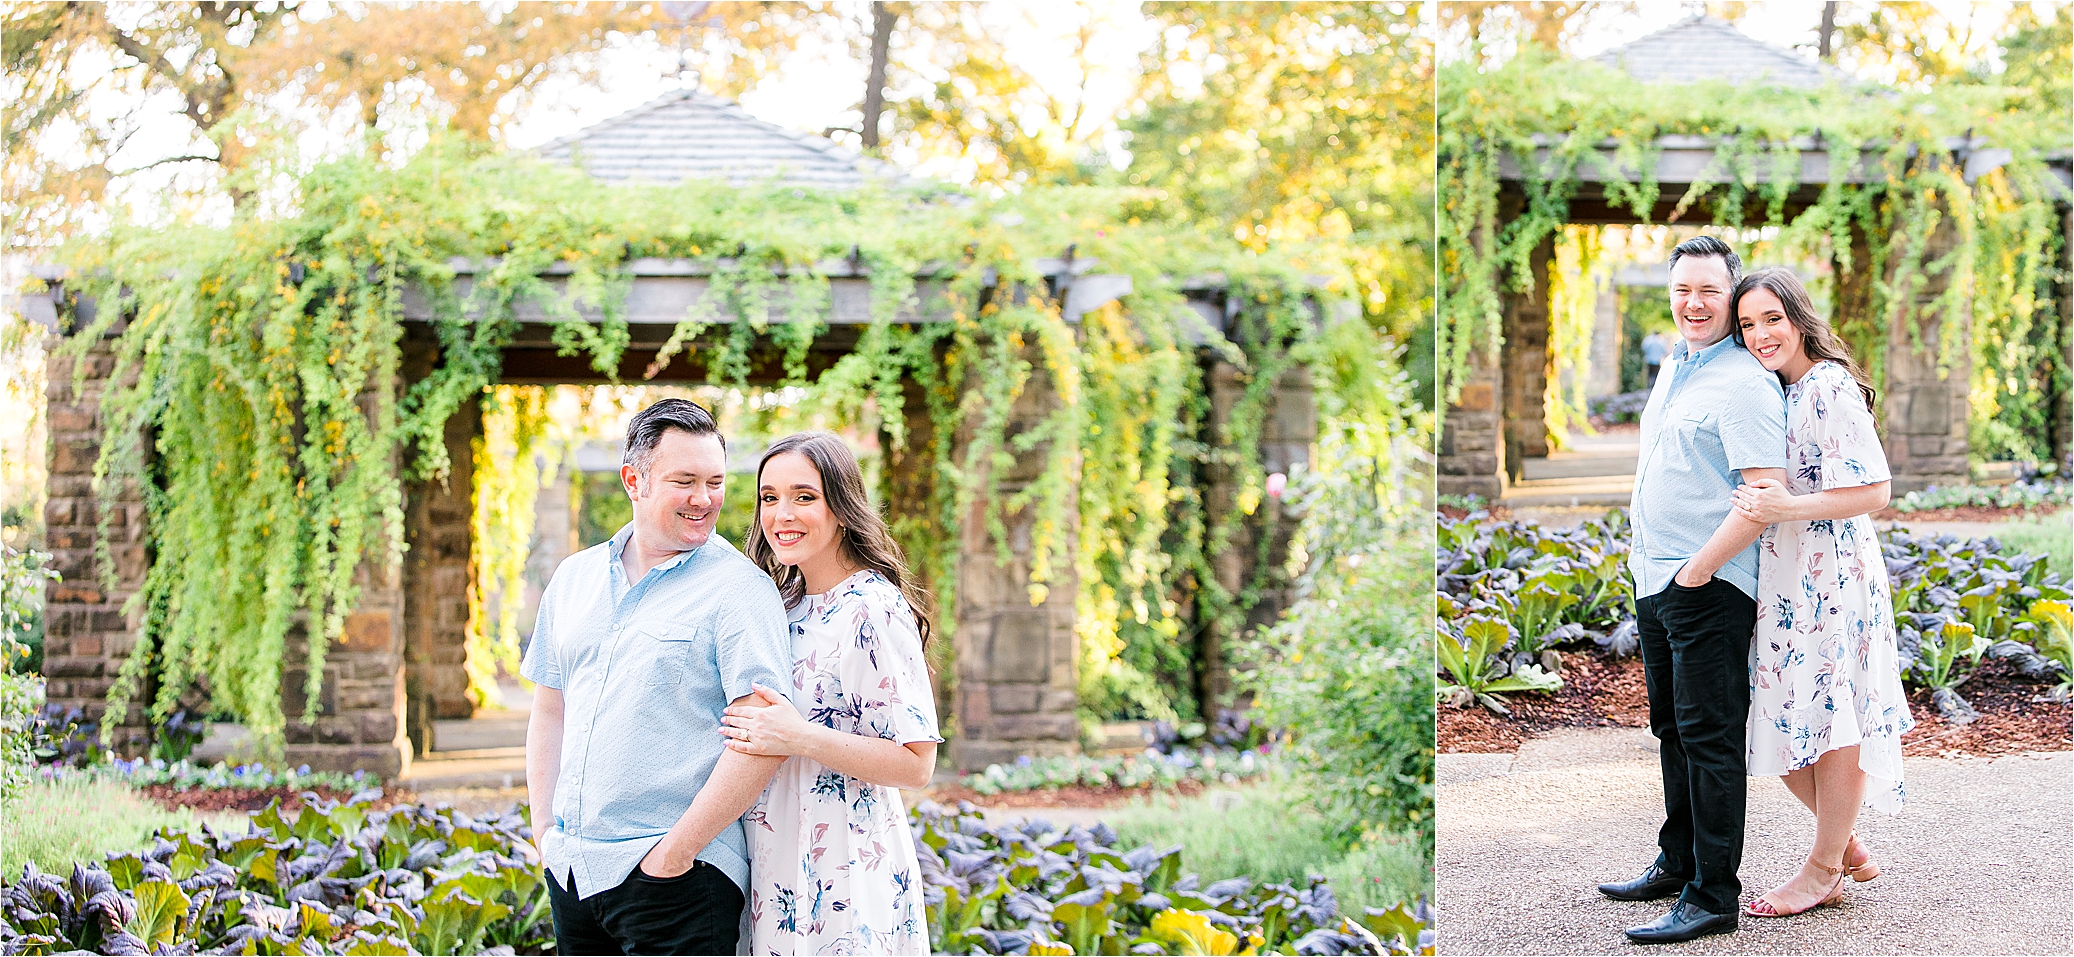 An engaged couple hugs and smiles in front of an arch of greenery during a portrait session at The Fort Worth Botanic Garden